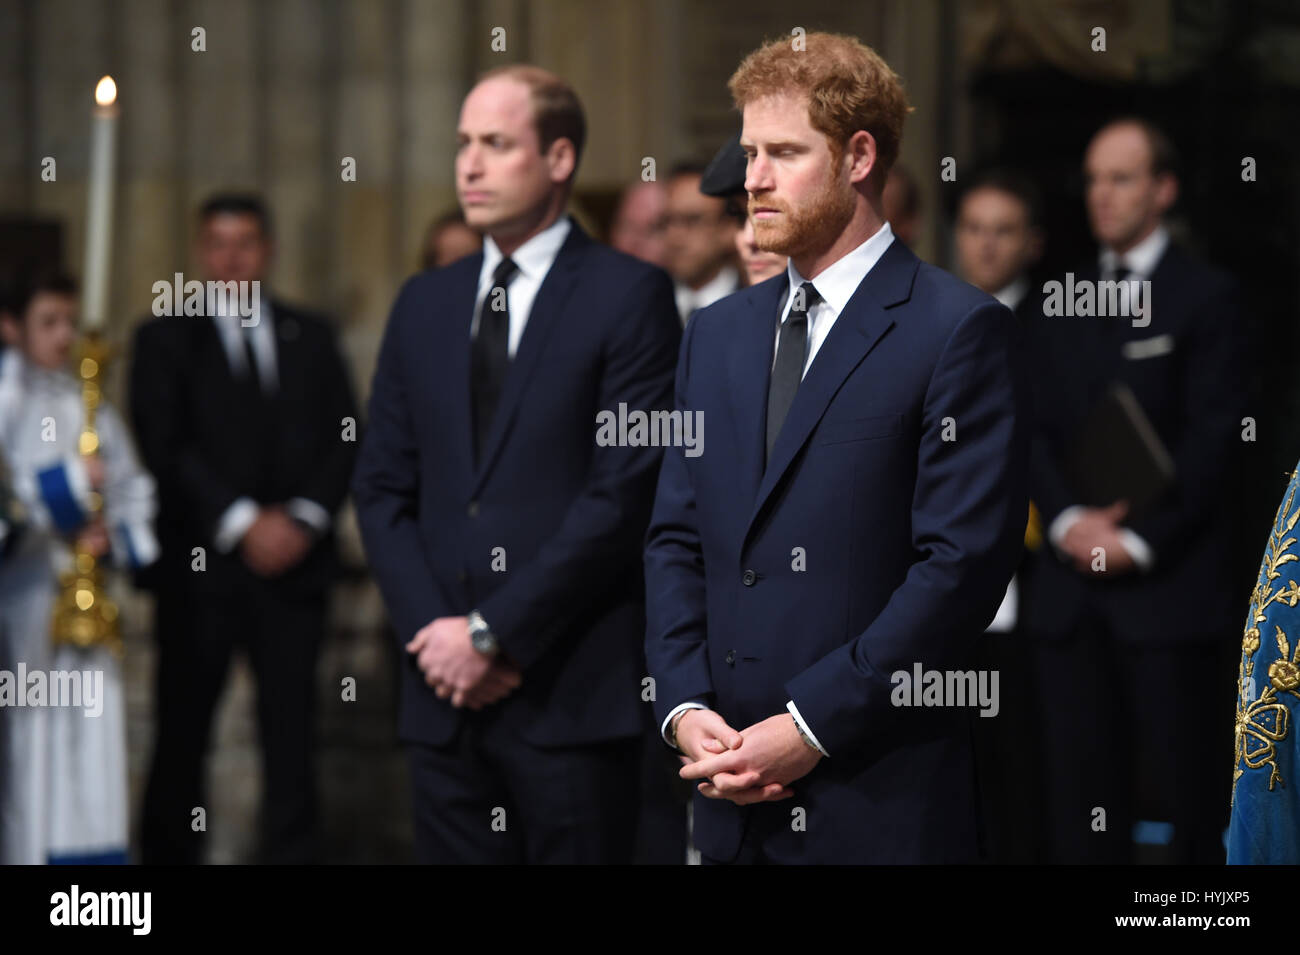 The Duke of Cambridge and Prince Harry attend the Service of Hope at Westminster Abbey in London, following the Westminster terror attack. Stock Photo